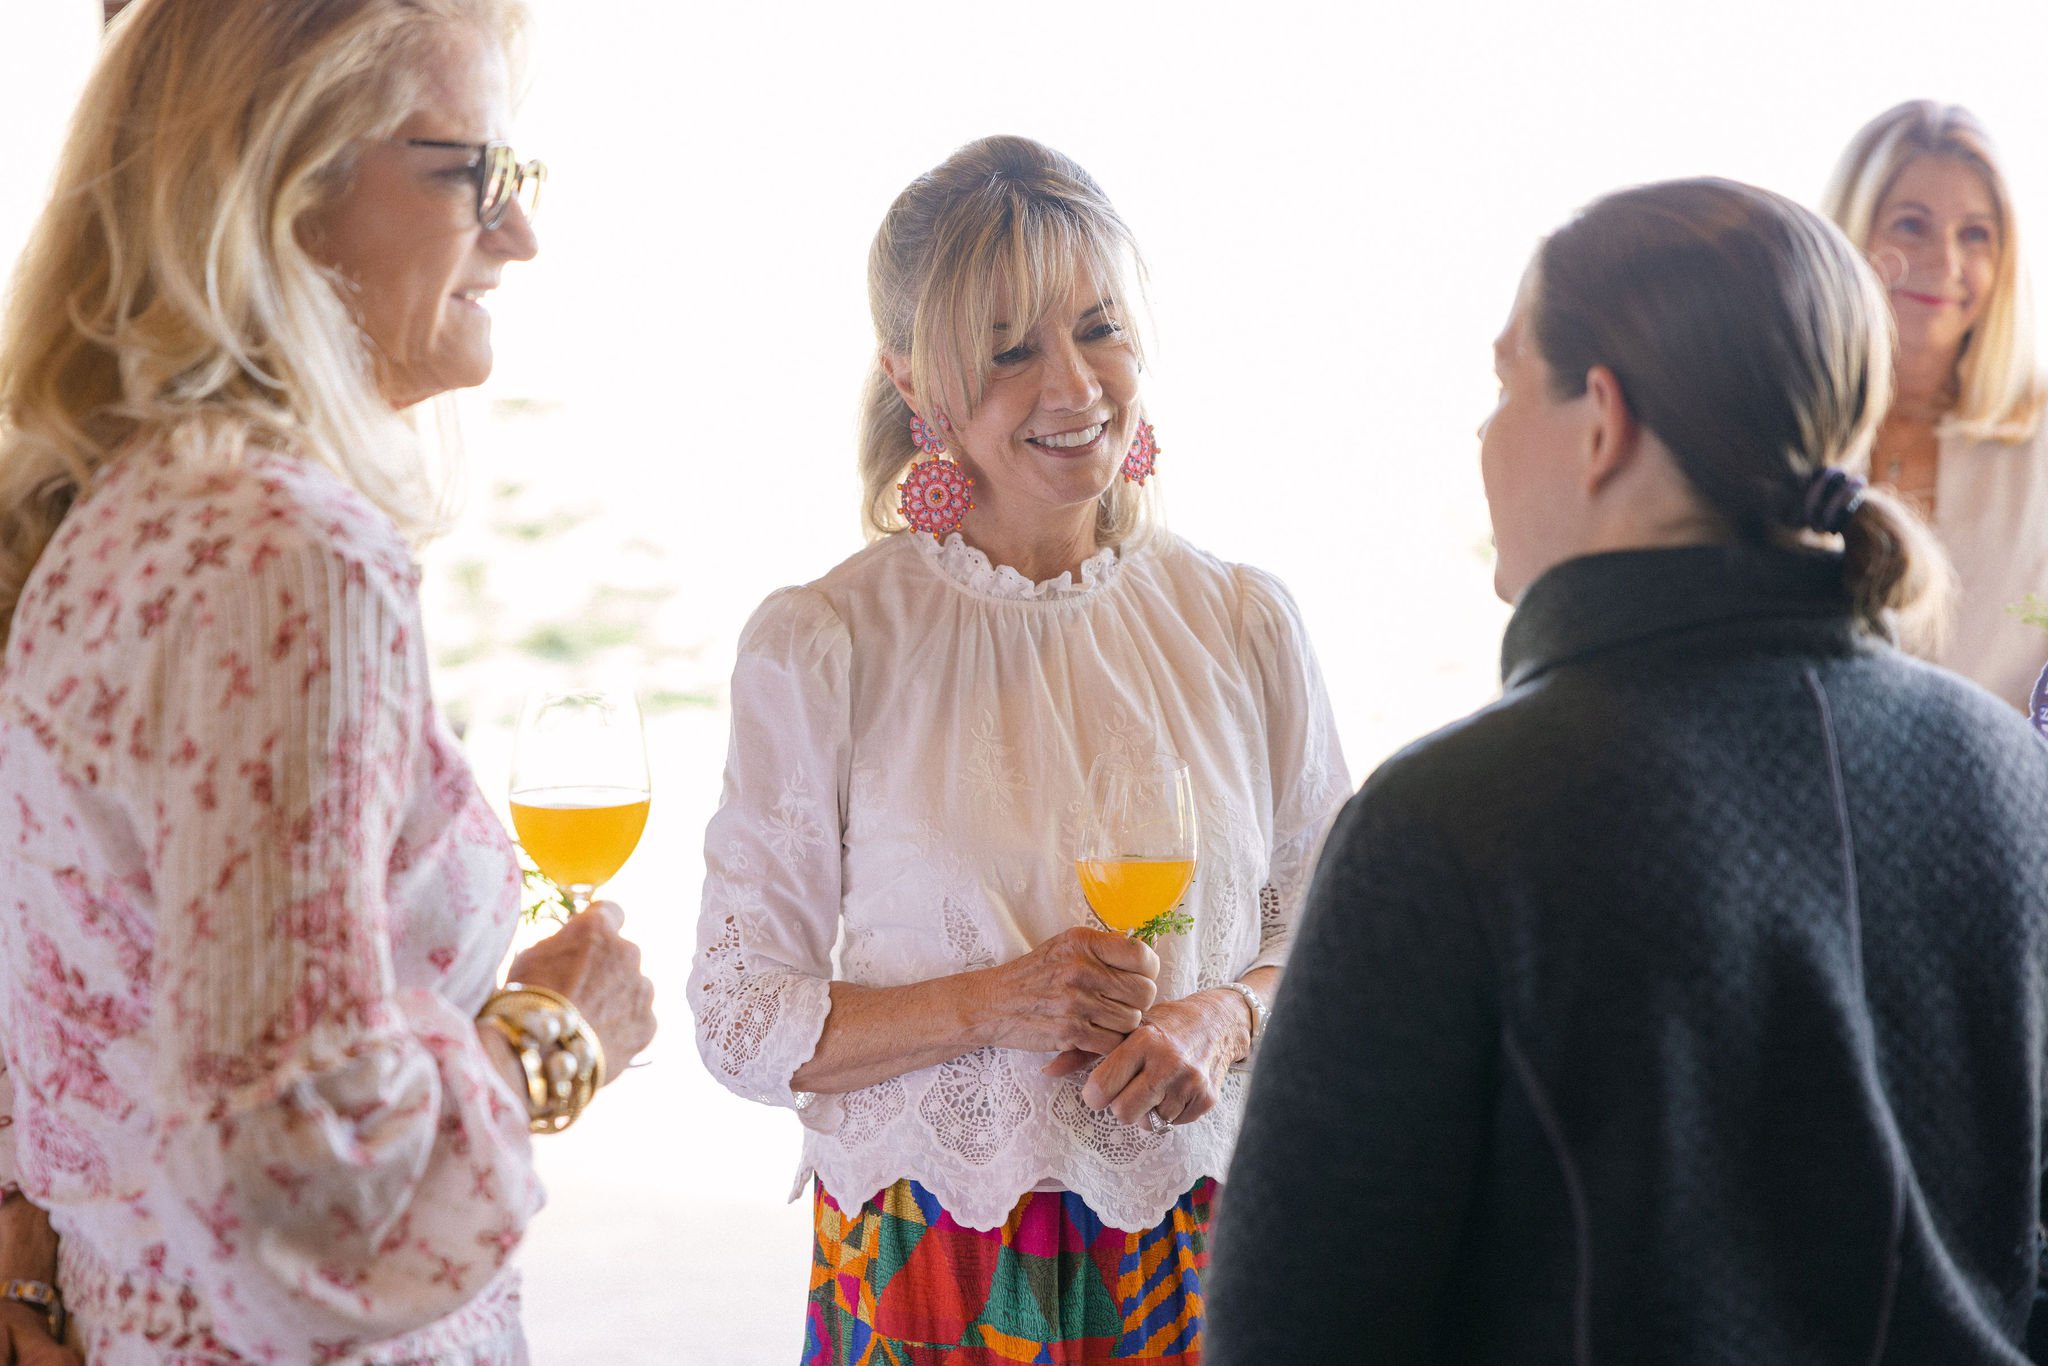 Guests Enjoying Cocktails at Bridal Lunch